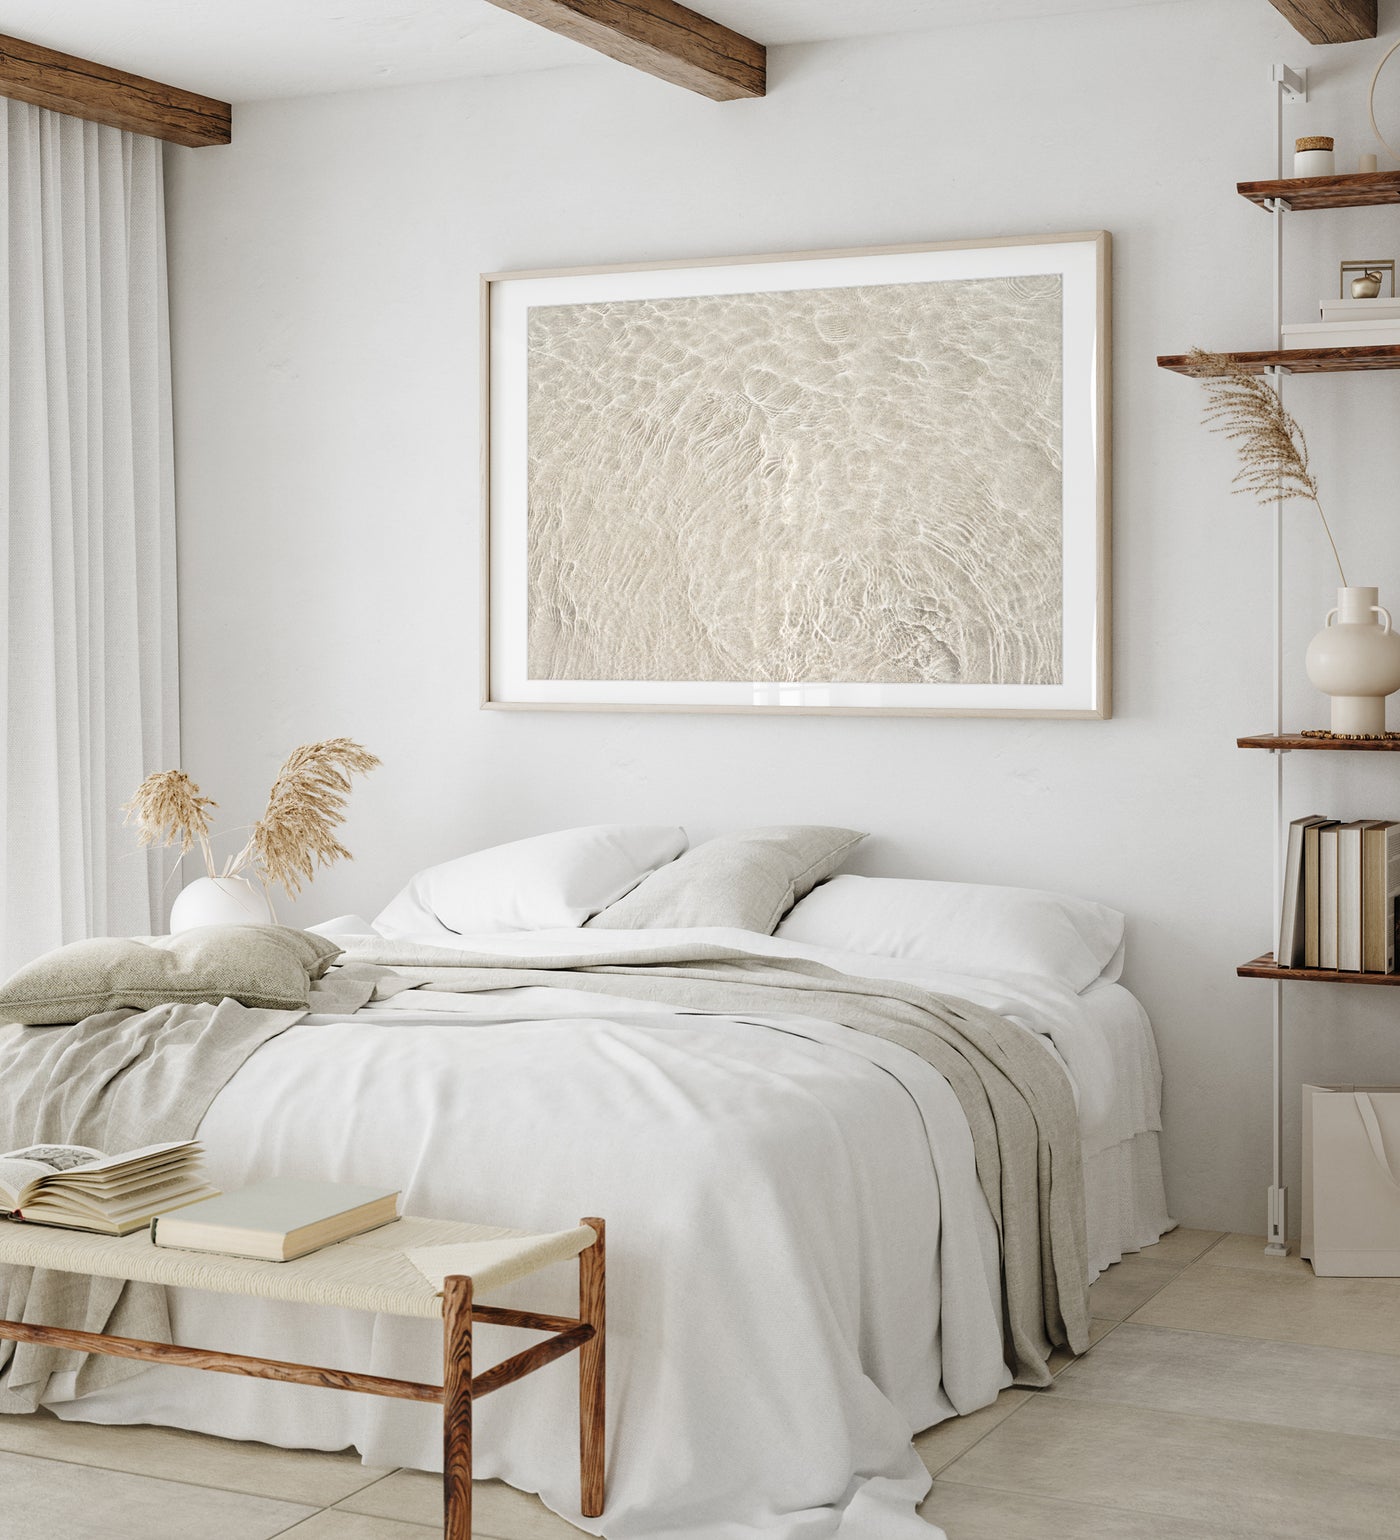 Shallow Water No 12 - Large neutral wall art by Cattie Coyle Photography in bedroom